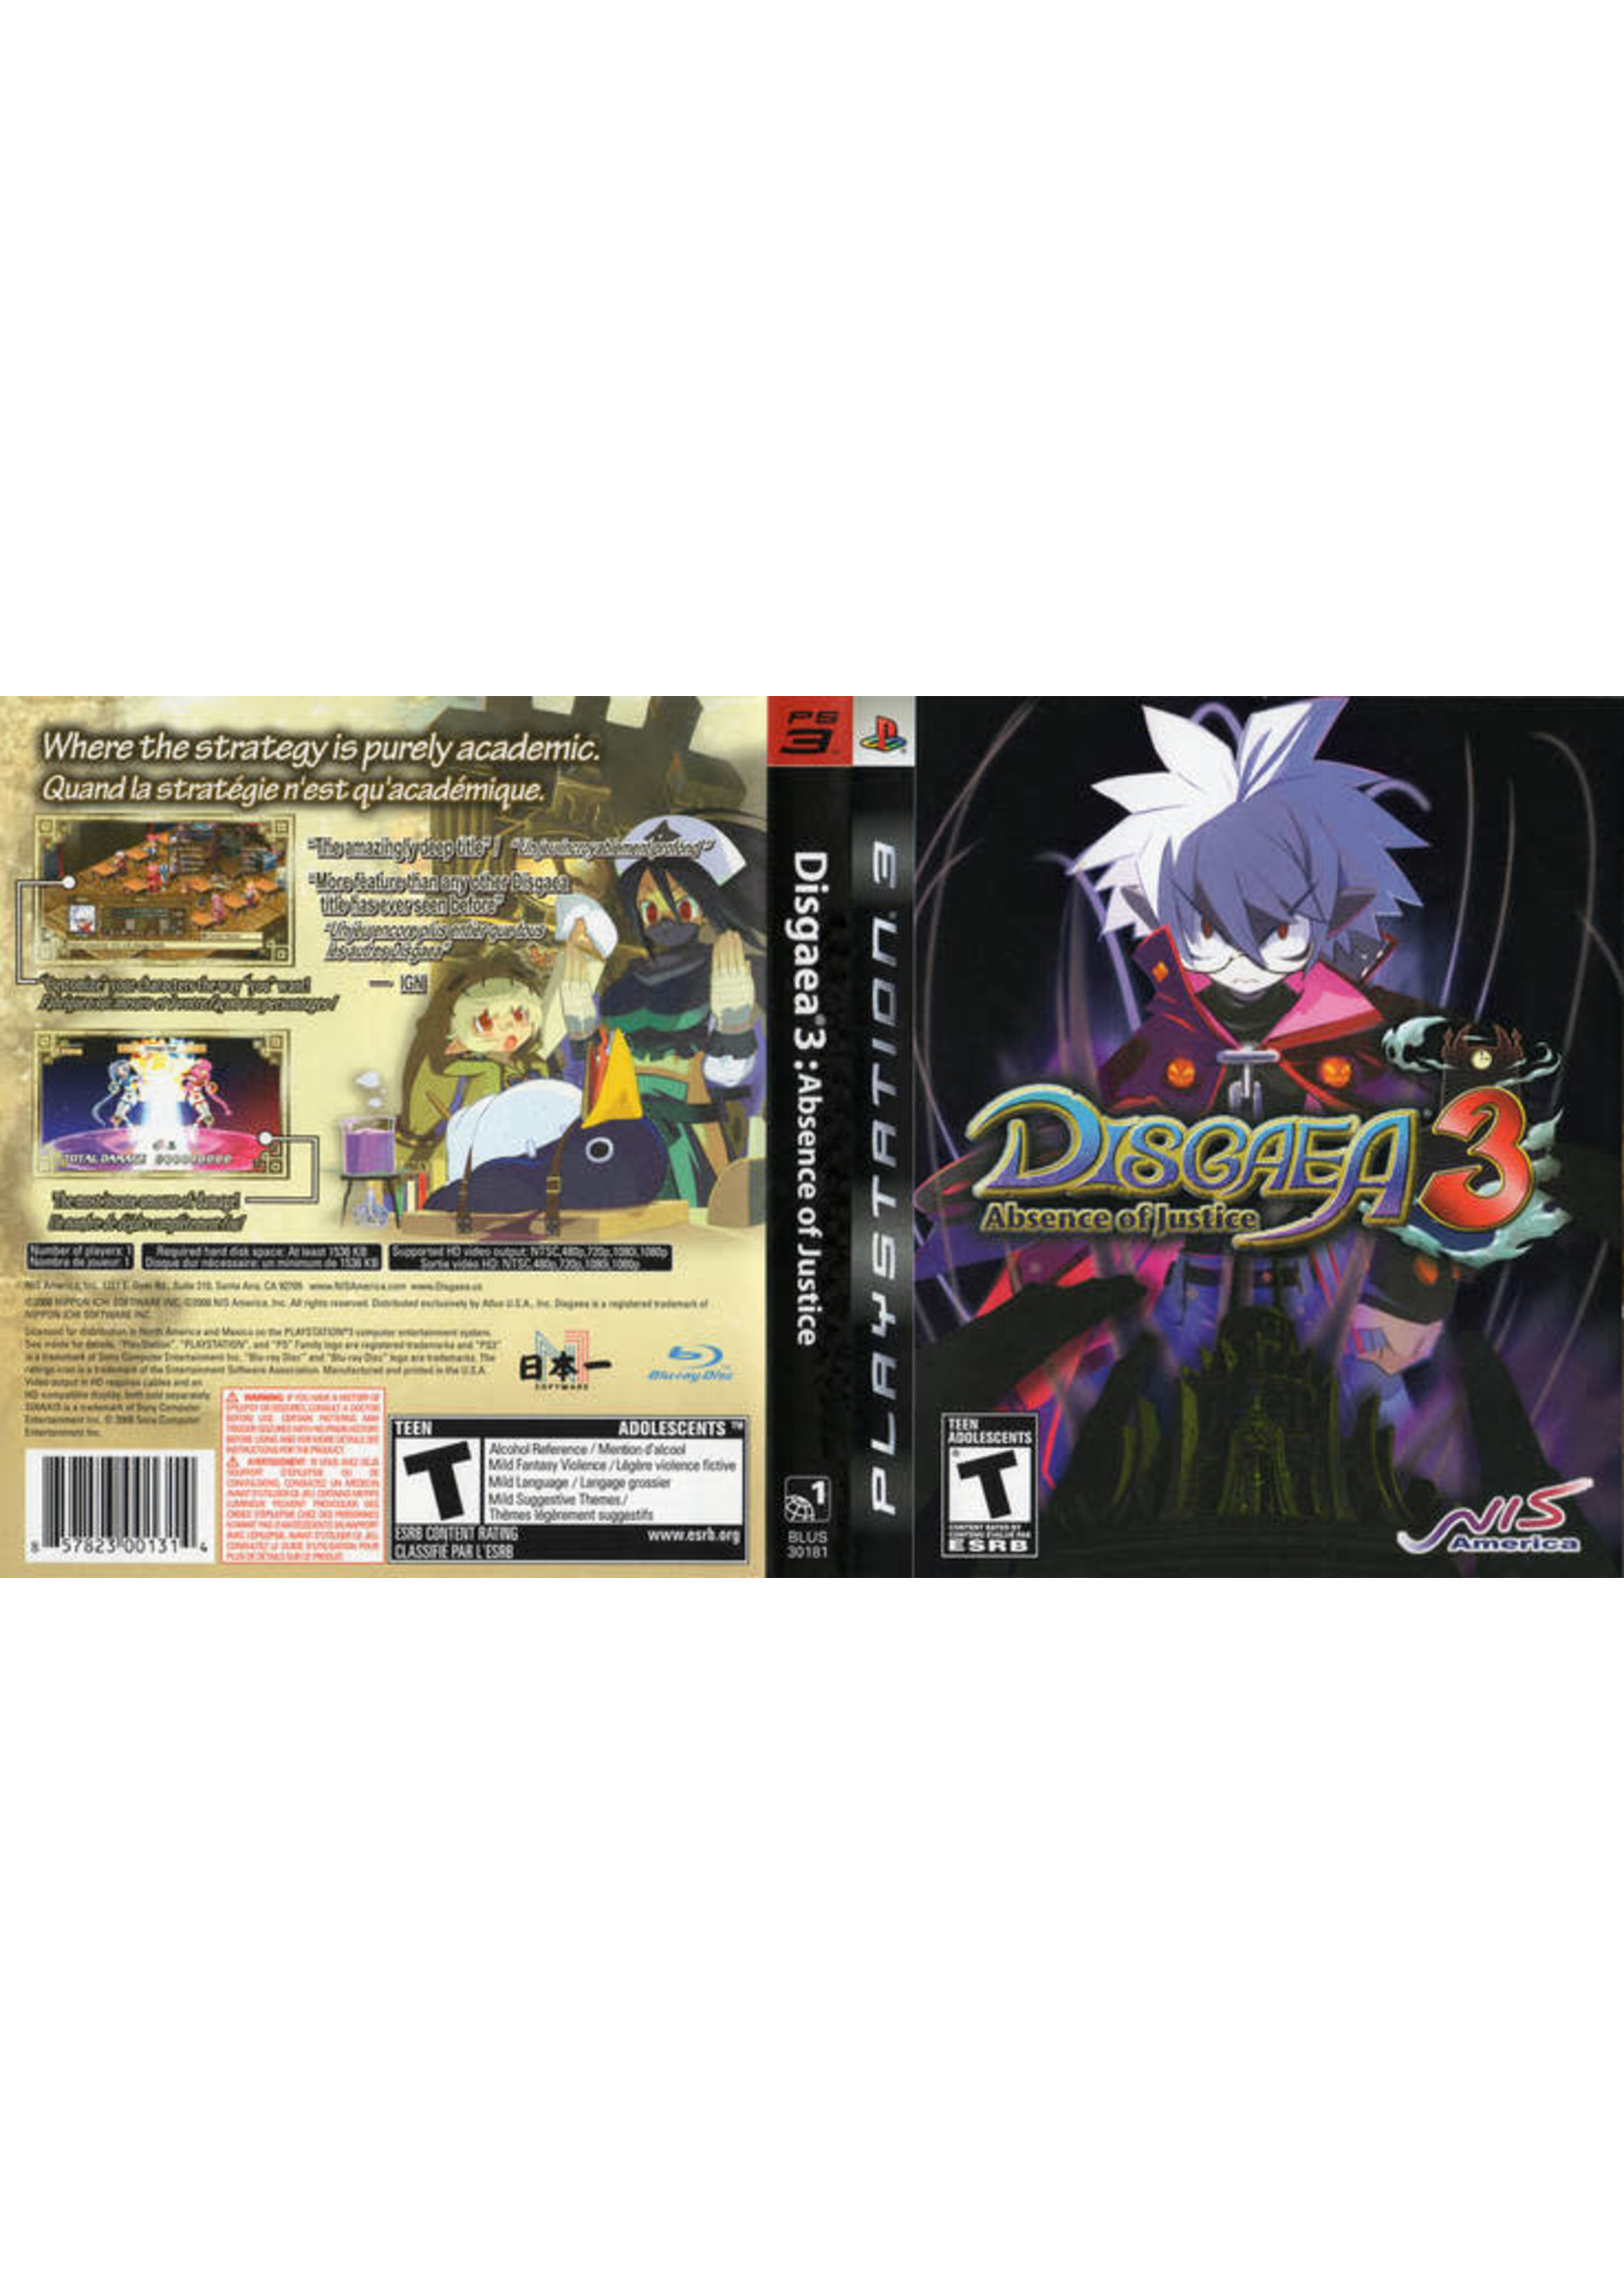 Sony Playstation 3 (PS3) Disgaea 3 Absense of Justice